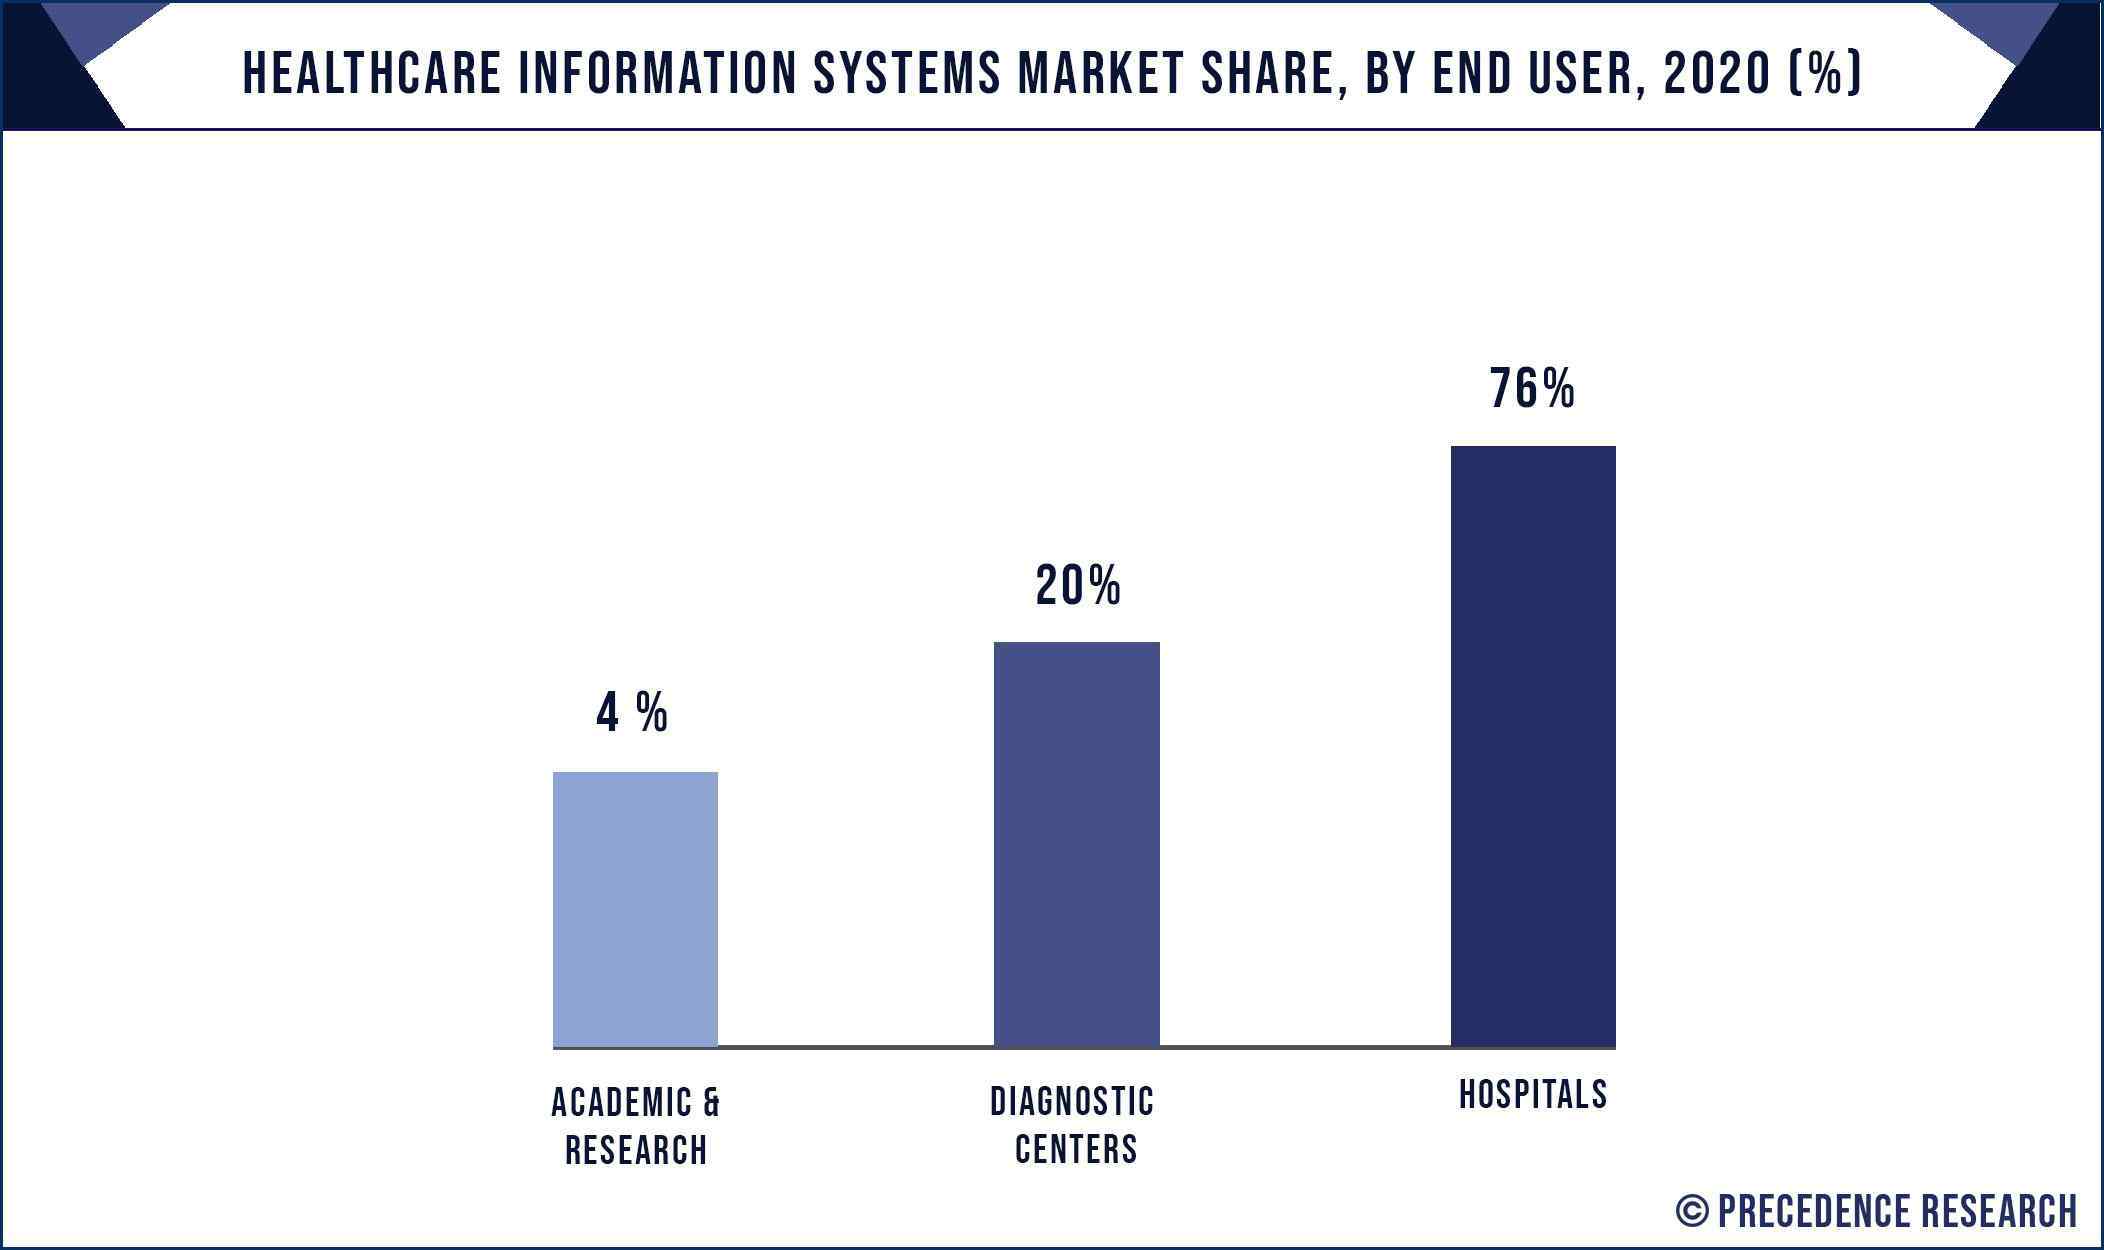 Healthcare Information Systems Market Share, By End User, 2020 (%)